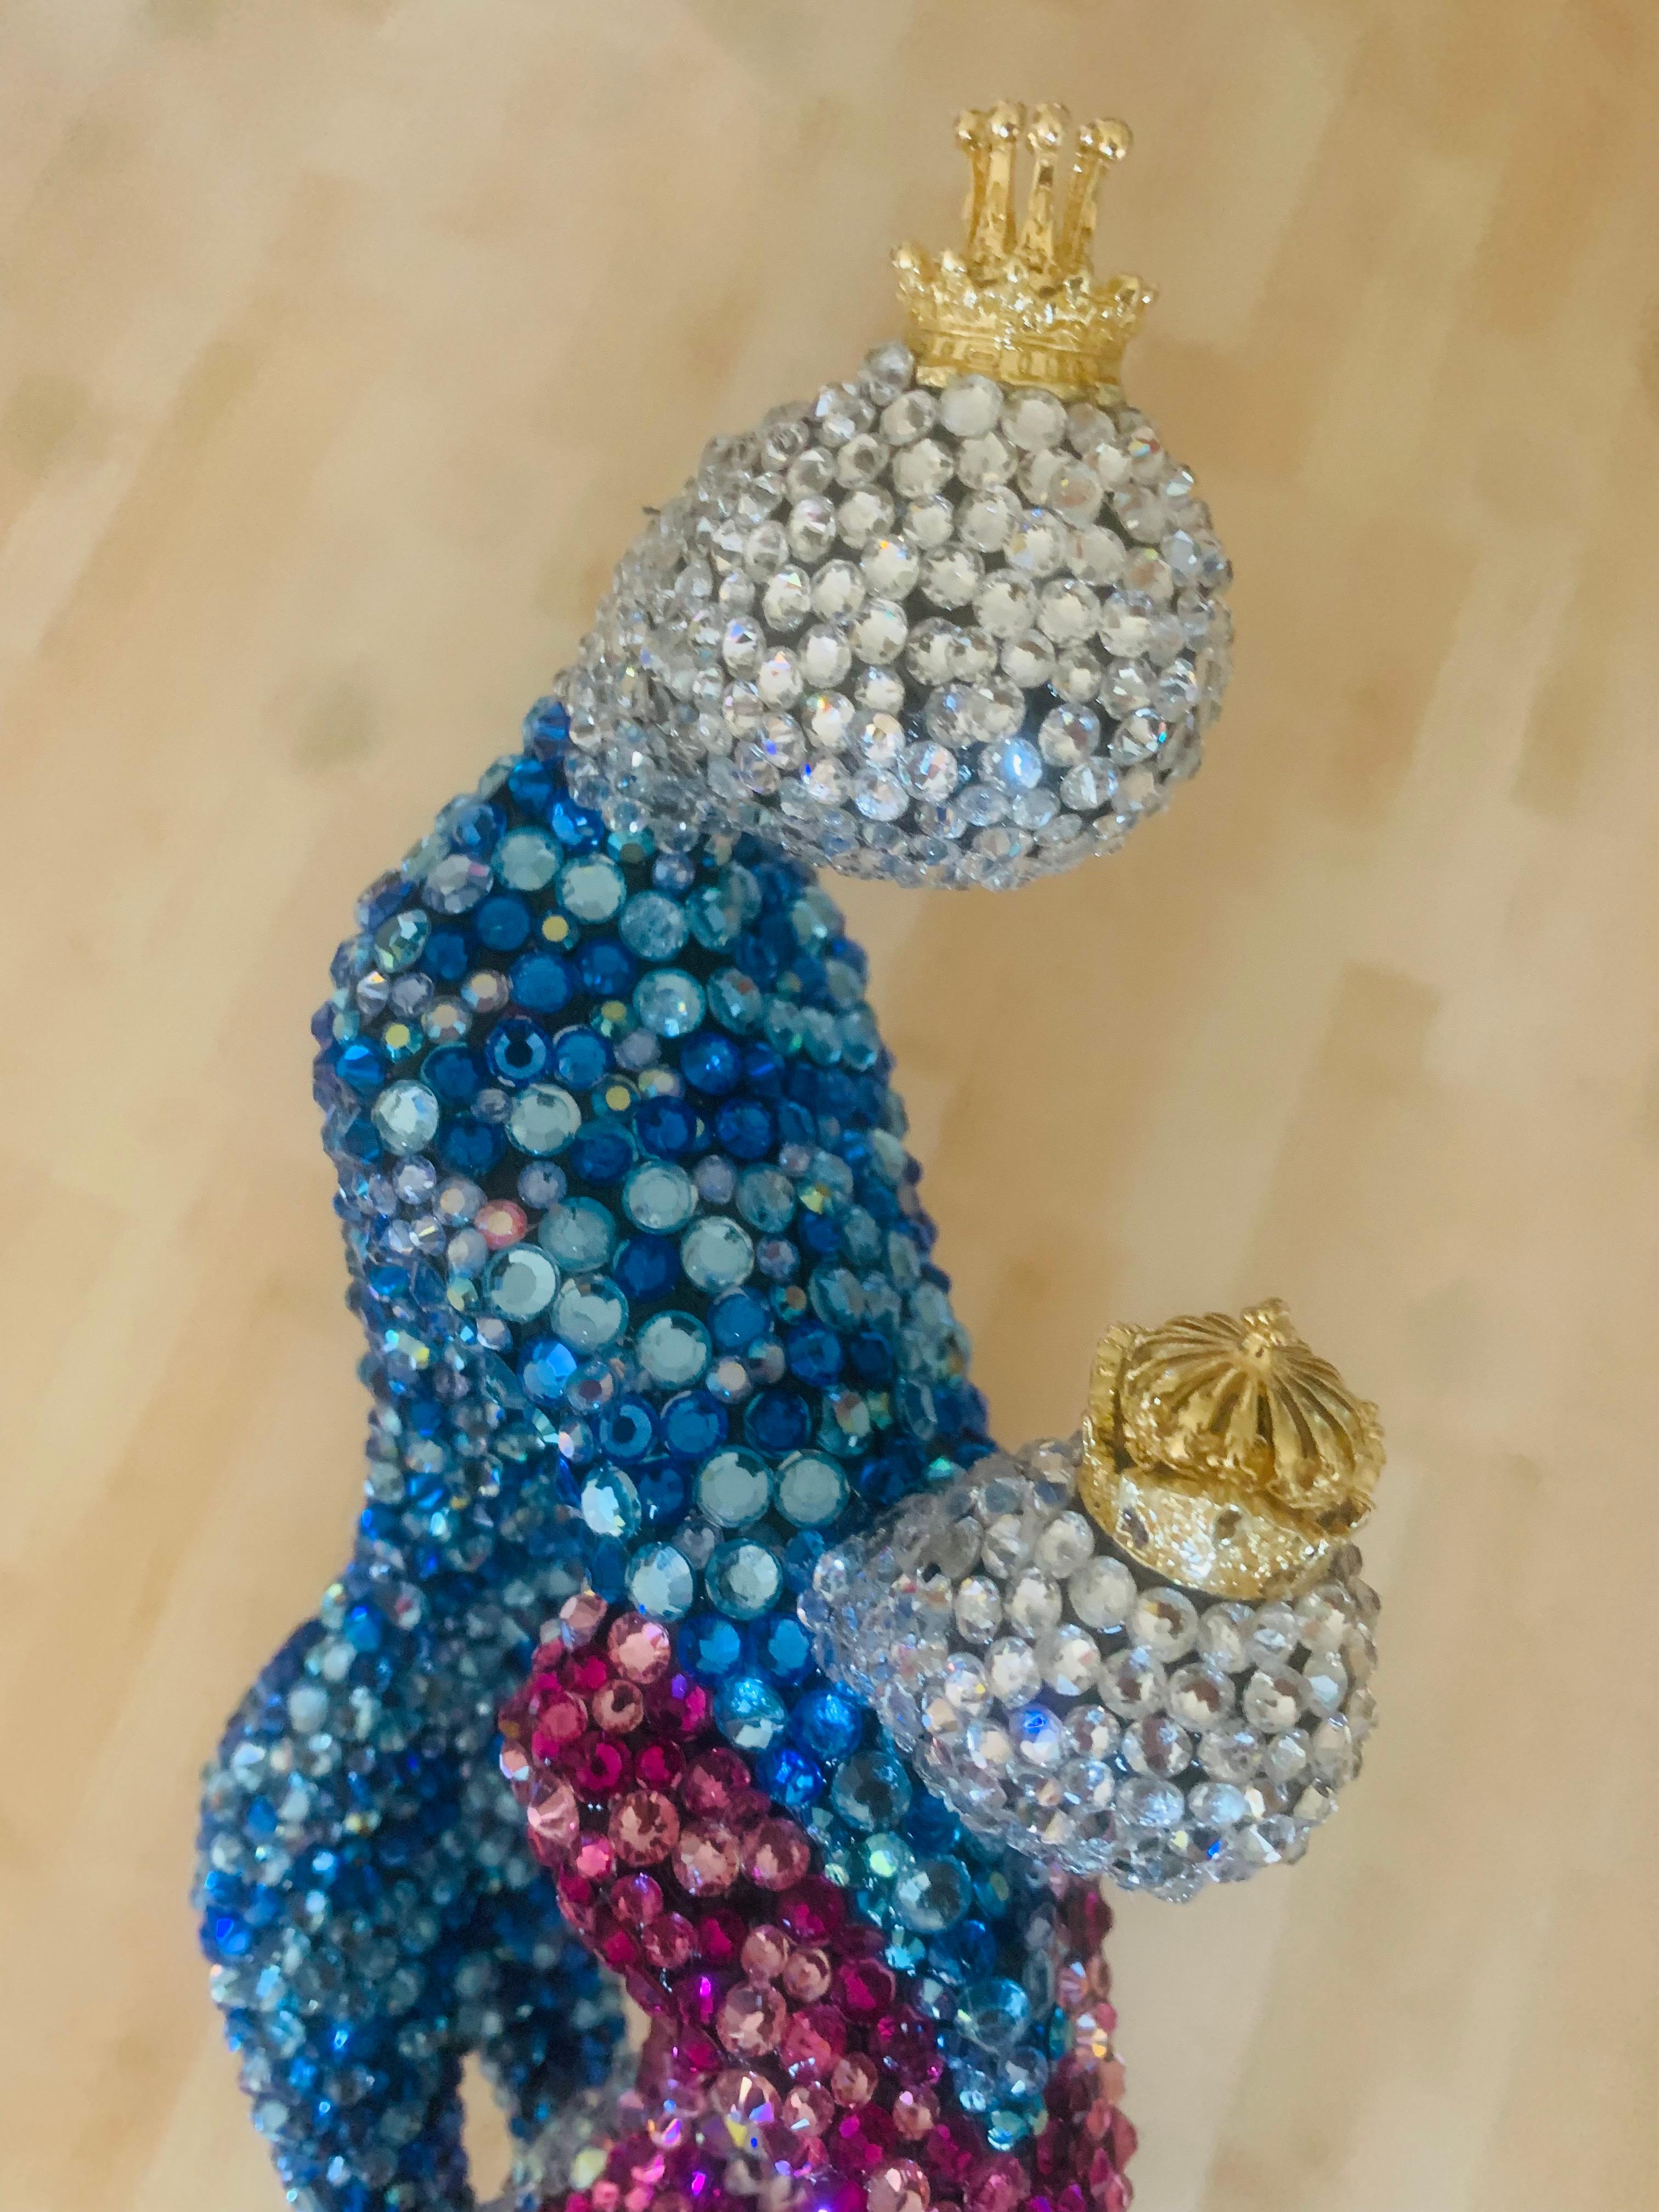 THE ROYAL FAMILY (1 Of a Kind Sculpture W/ Genuine Swarovski Crystals) 11